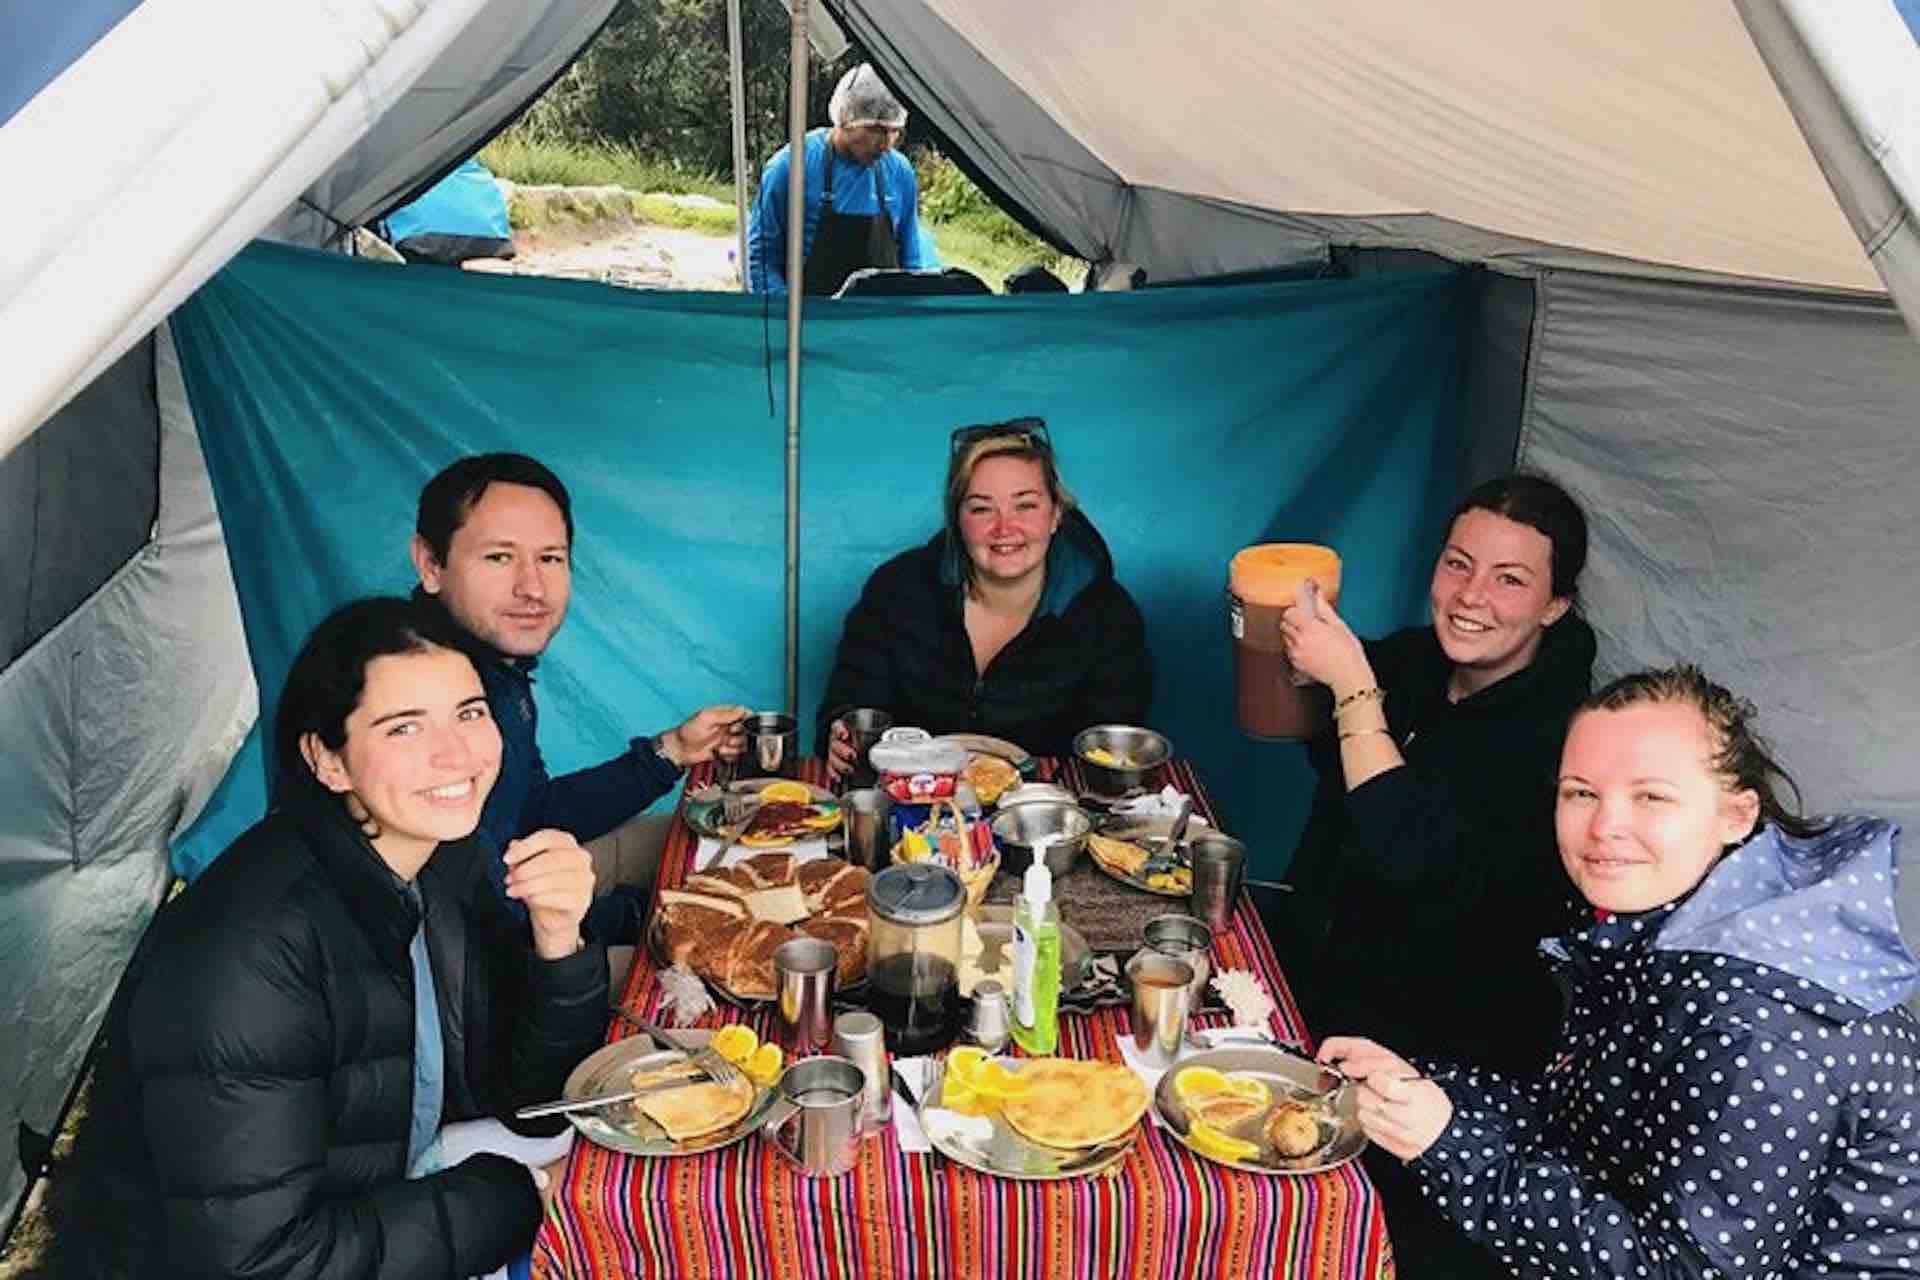 Machu Picchu inca trail guests in tent with table